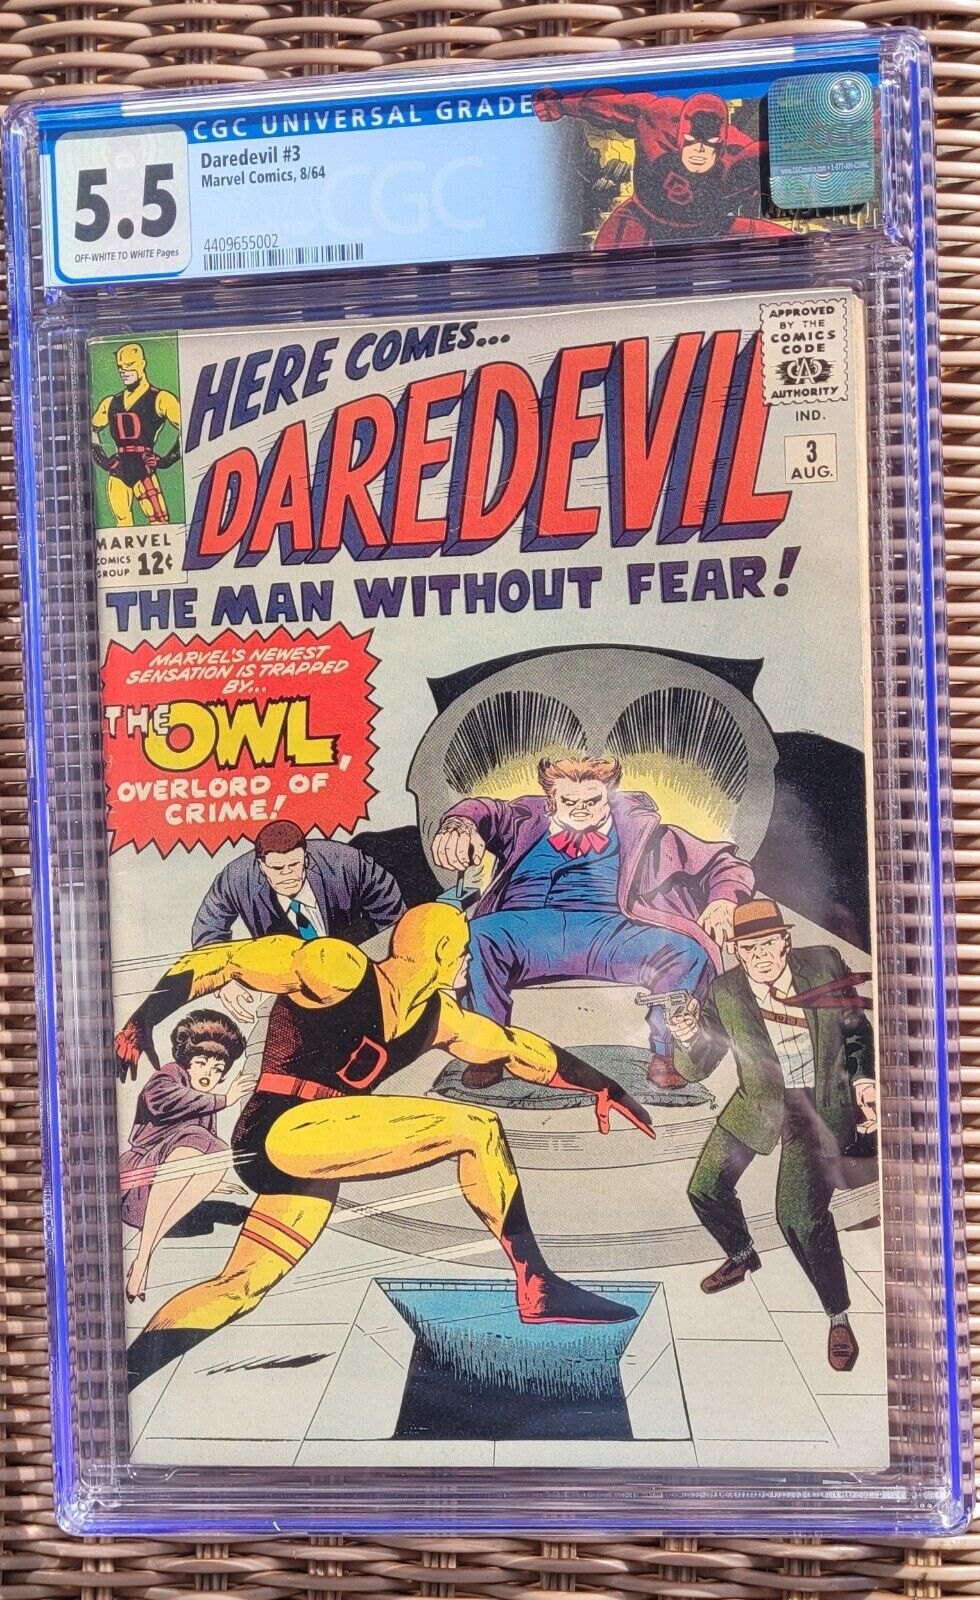 Daredevil (1964) #3 CGC VG+ 5.5 1st Appearance and Origin of the Owl Marvel